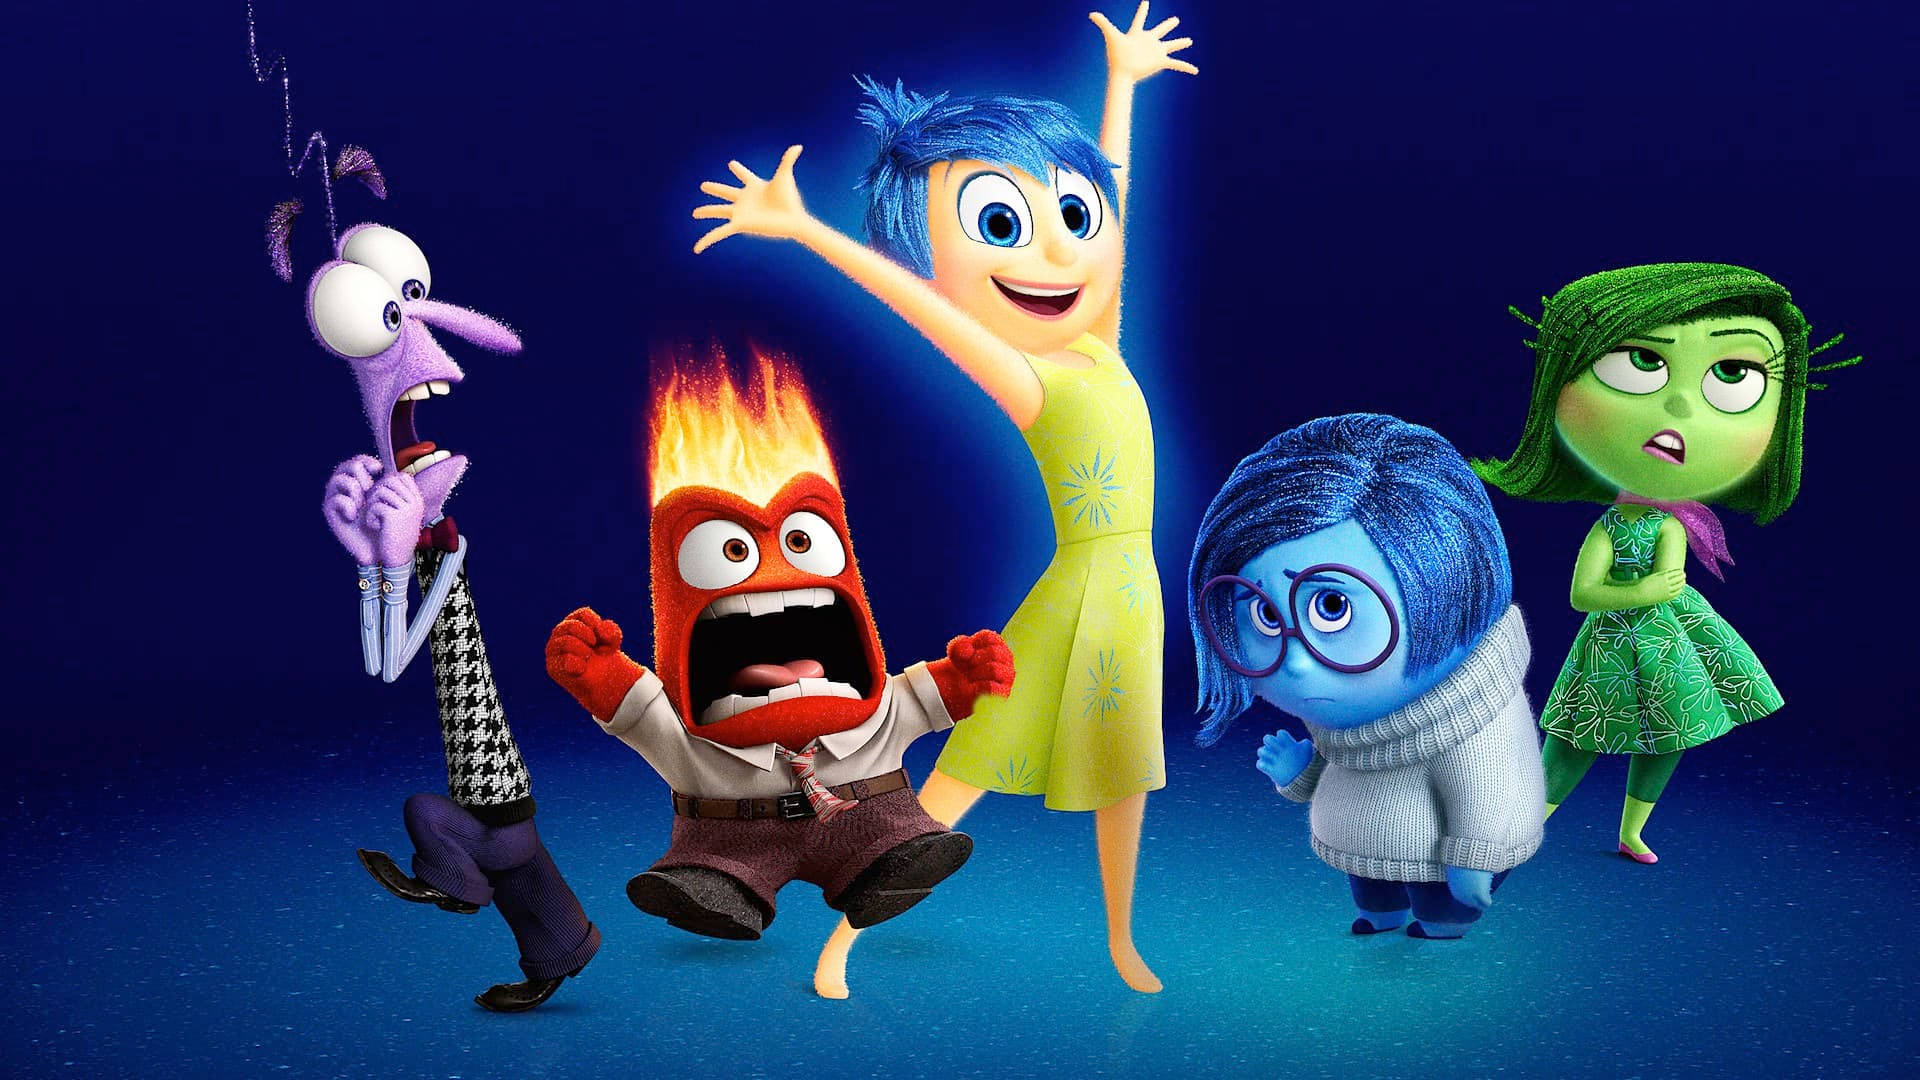 Feelings take over Riley, as her five emotions come to life in Pixar's Inside Out. Wallpaper